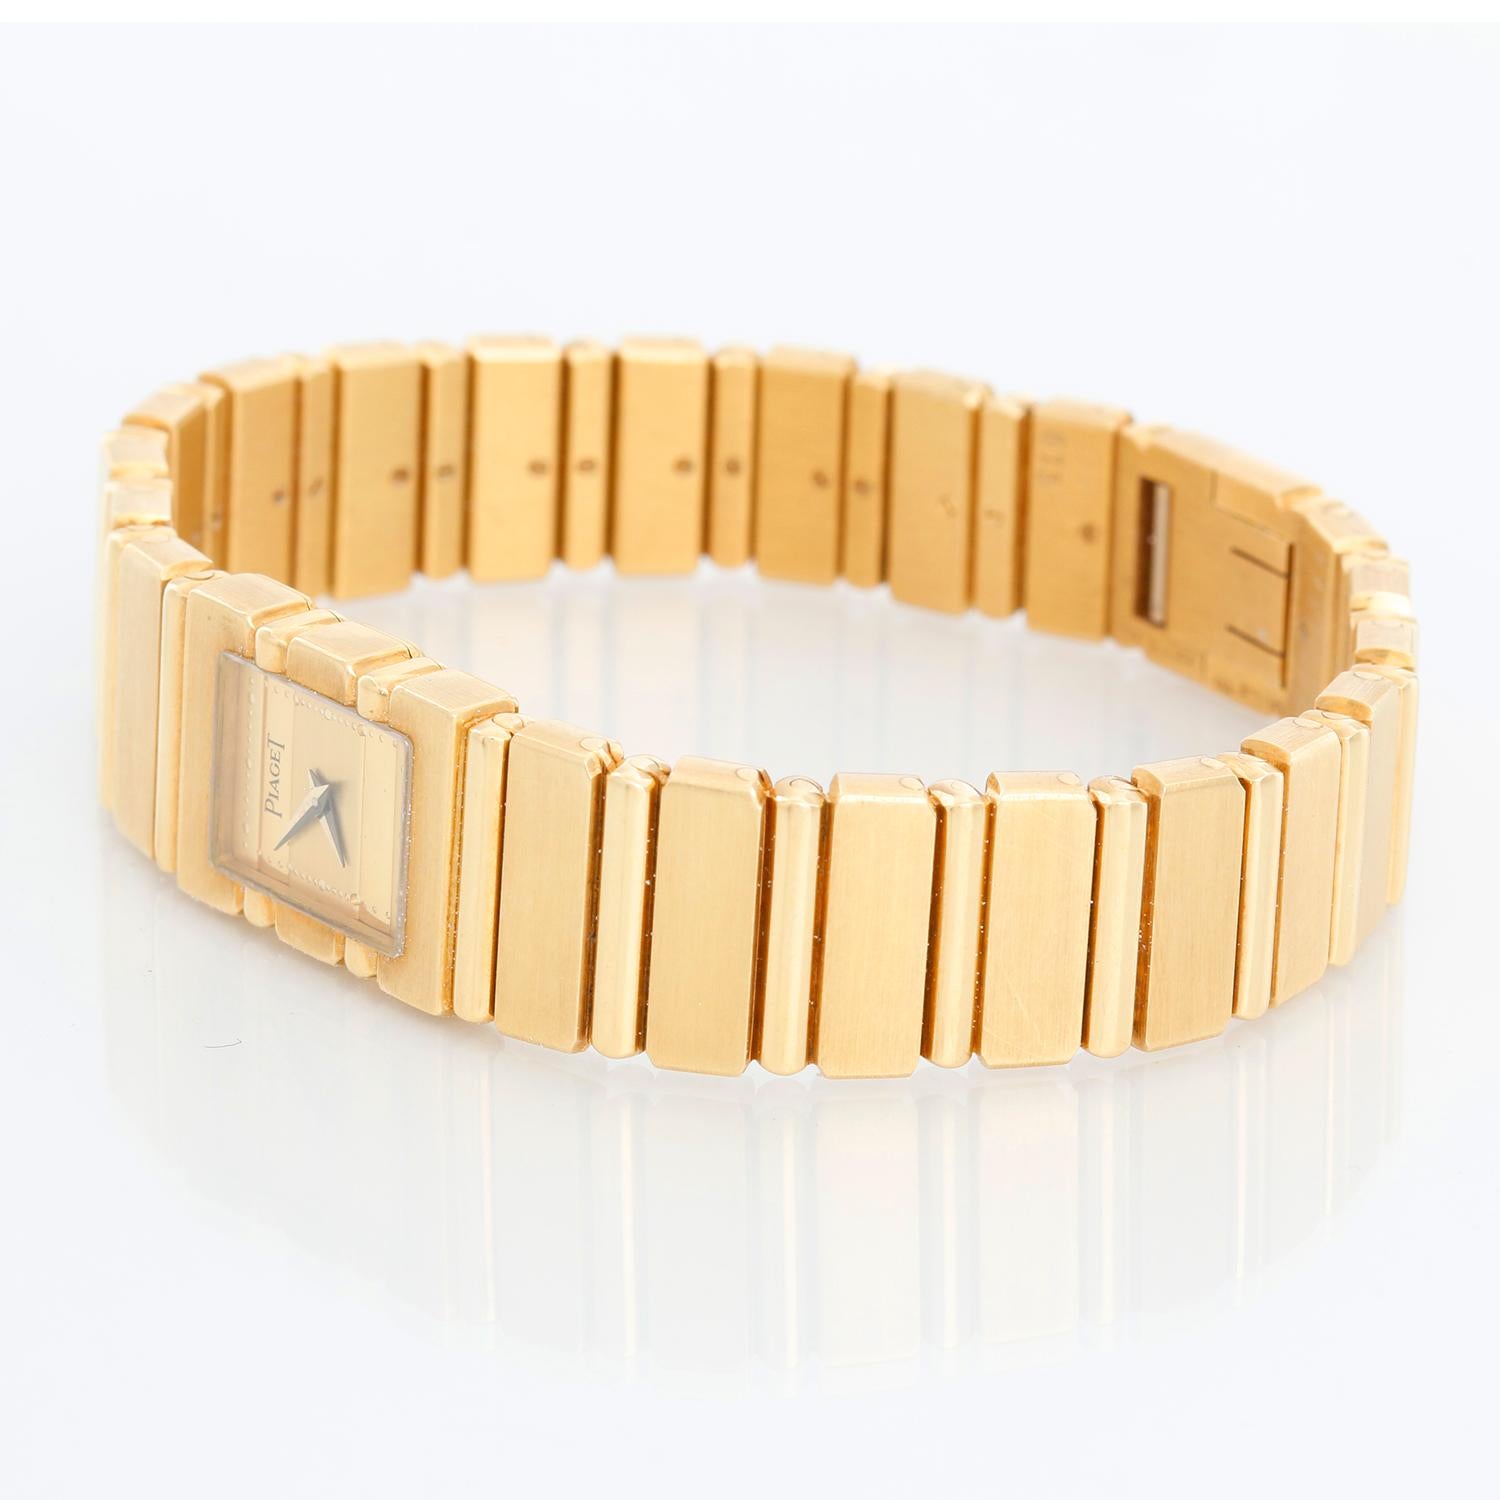 Piaget Polo Mini  18K Yellow Gold Watch - Quartz. 18K Yellow gold ( 14 x 20 mm ). Champagne dial. 18K Yellow Gold Piaget Bracelet with 18K Yellow gold deployant clasp; will fit a 6 1/2 inch wrist. Pre-owned with Piaget  box and papers.